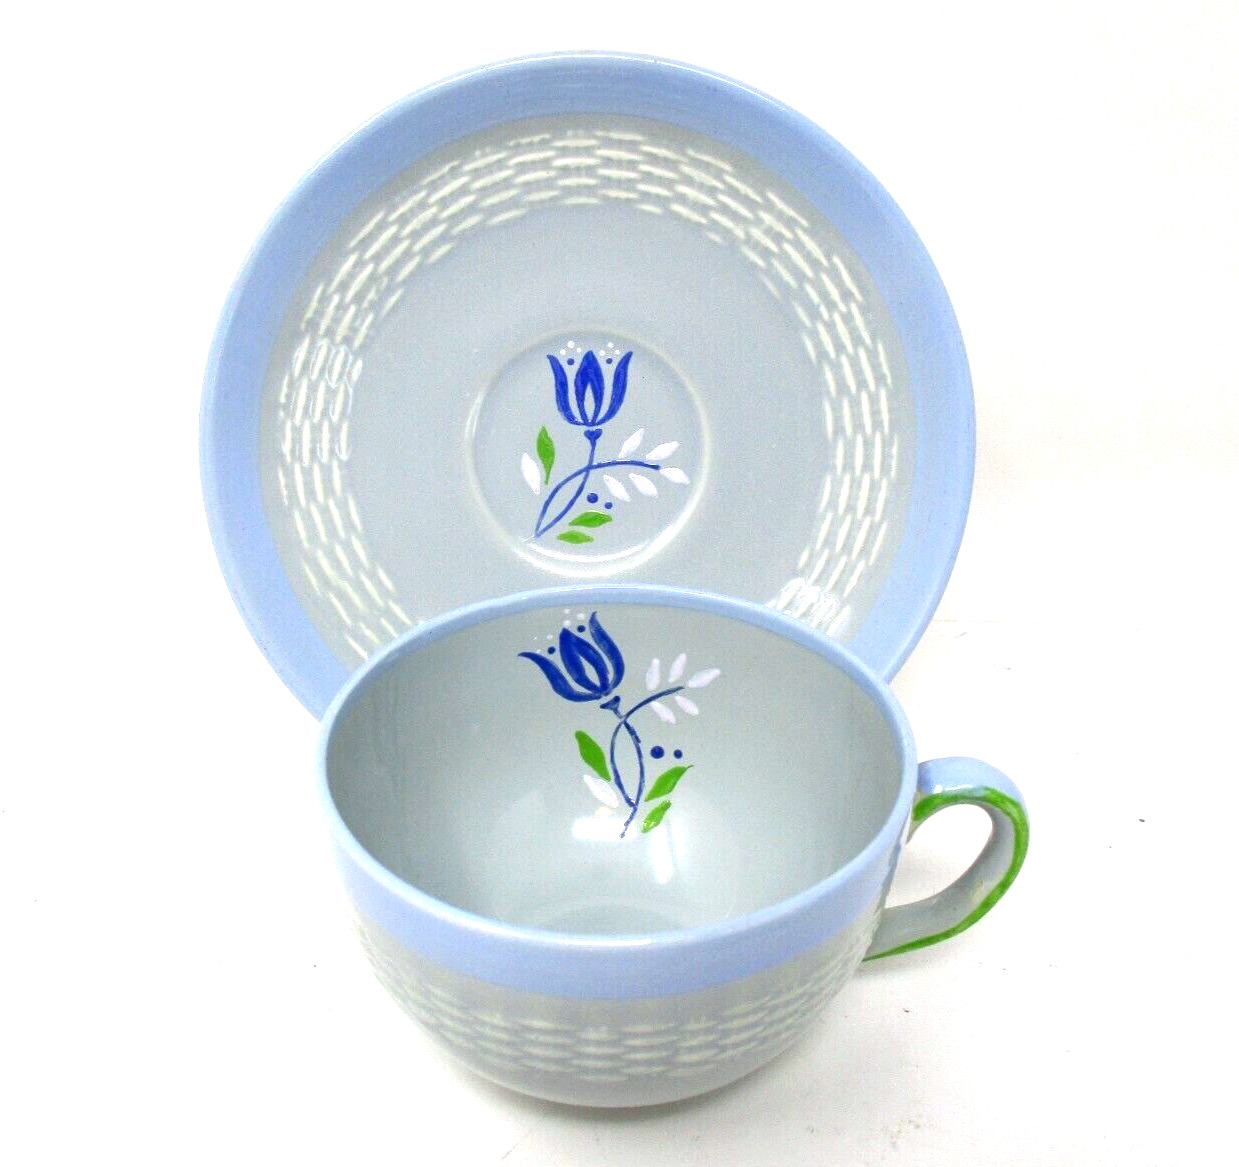 Vintage Mintons England Teacup and Saucer Chinese Celadon Green Blue Handpainted